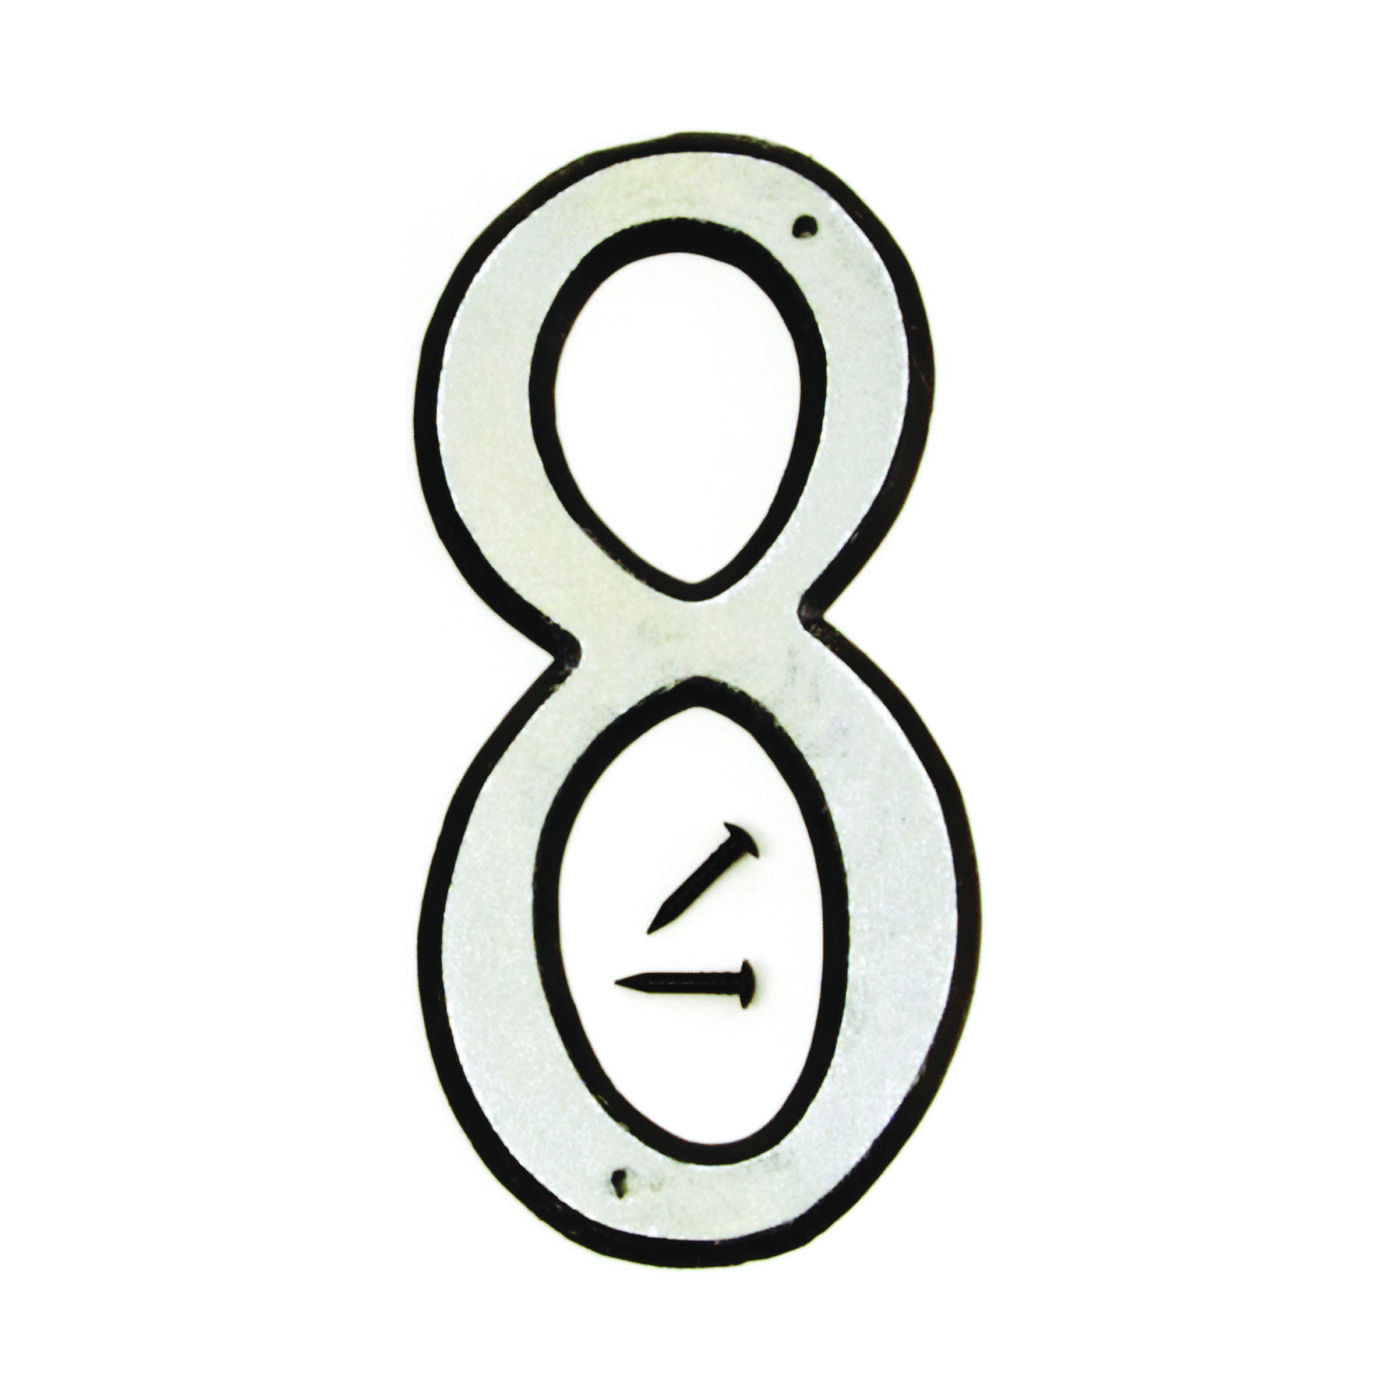 30600 Series 30608 House Number, Character: 8, 4 in H Character, Black/White Character, Plastic